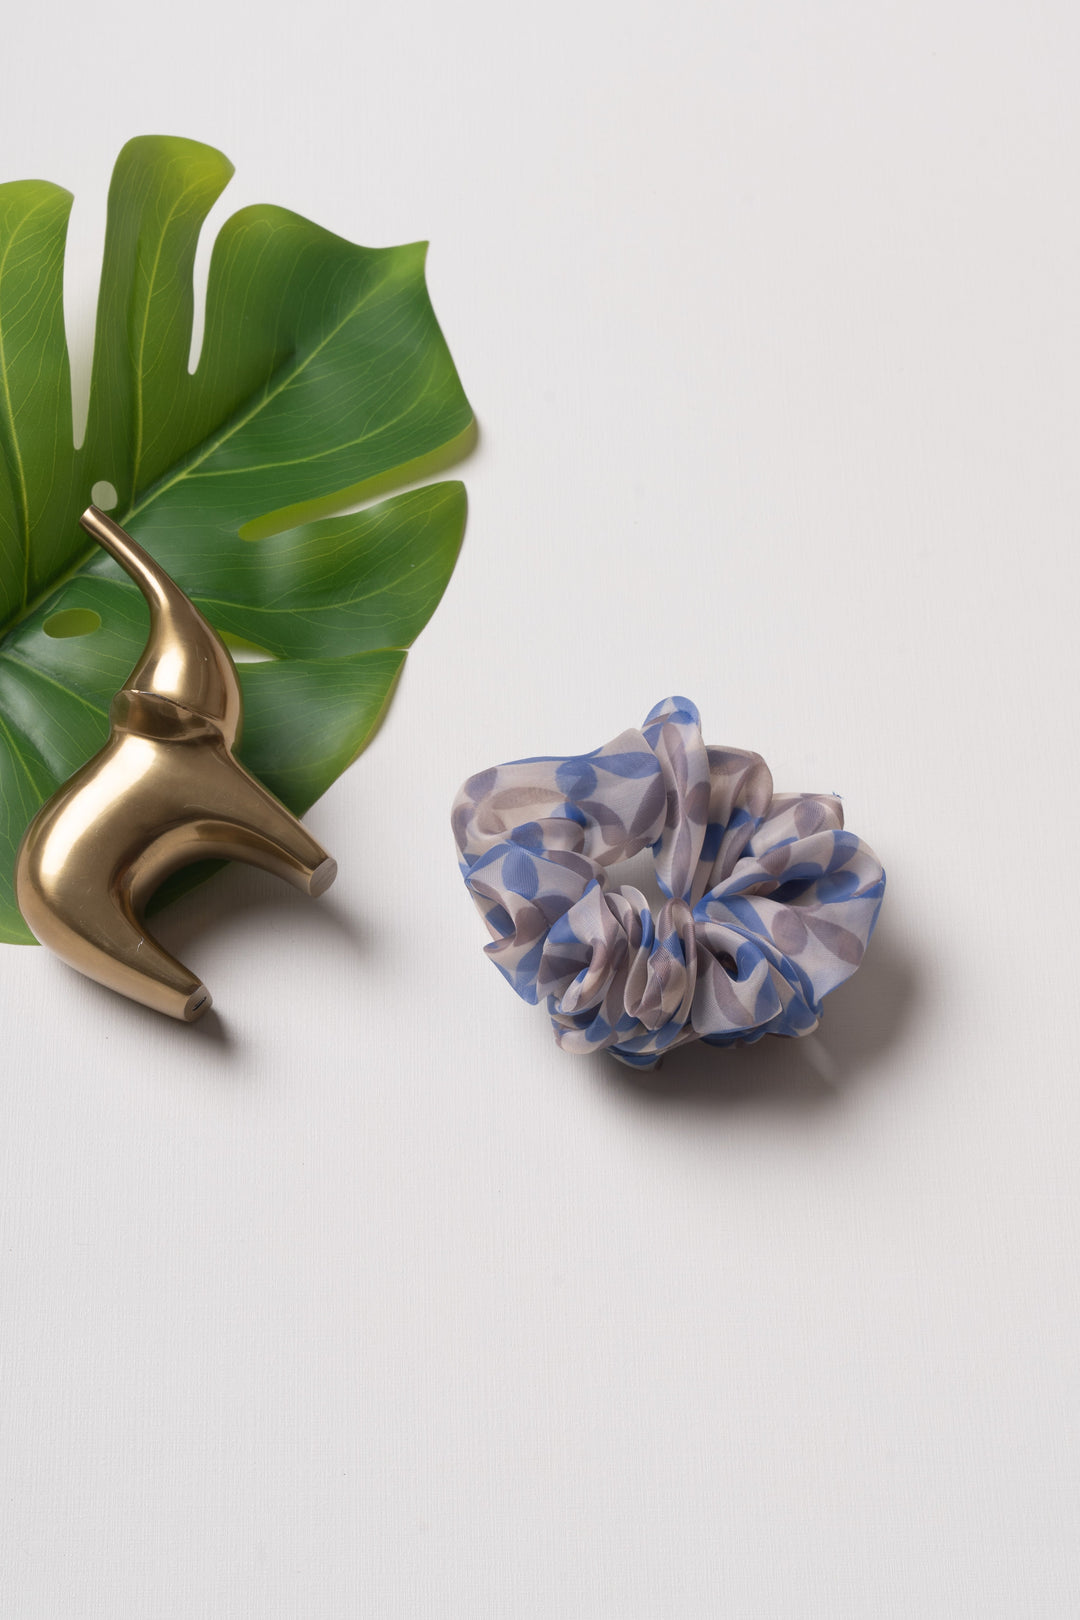 The Nesavu Scrunchies / Rubber Band Serene Sky Scrunchie - A Whiff of Cloudy Blues in Your Hair Nesavu Gray JHS18F Serene Sky Scrunchie | Ethereal Blue Patterns for Chic Hairstyling | The Nesavu